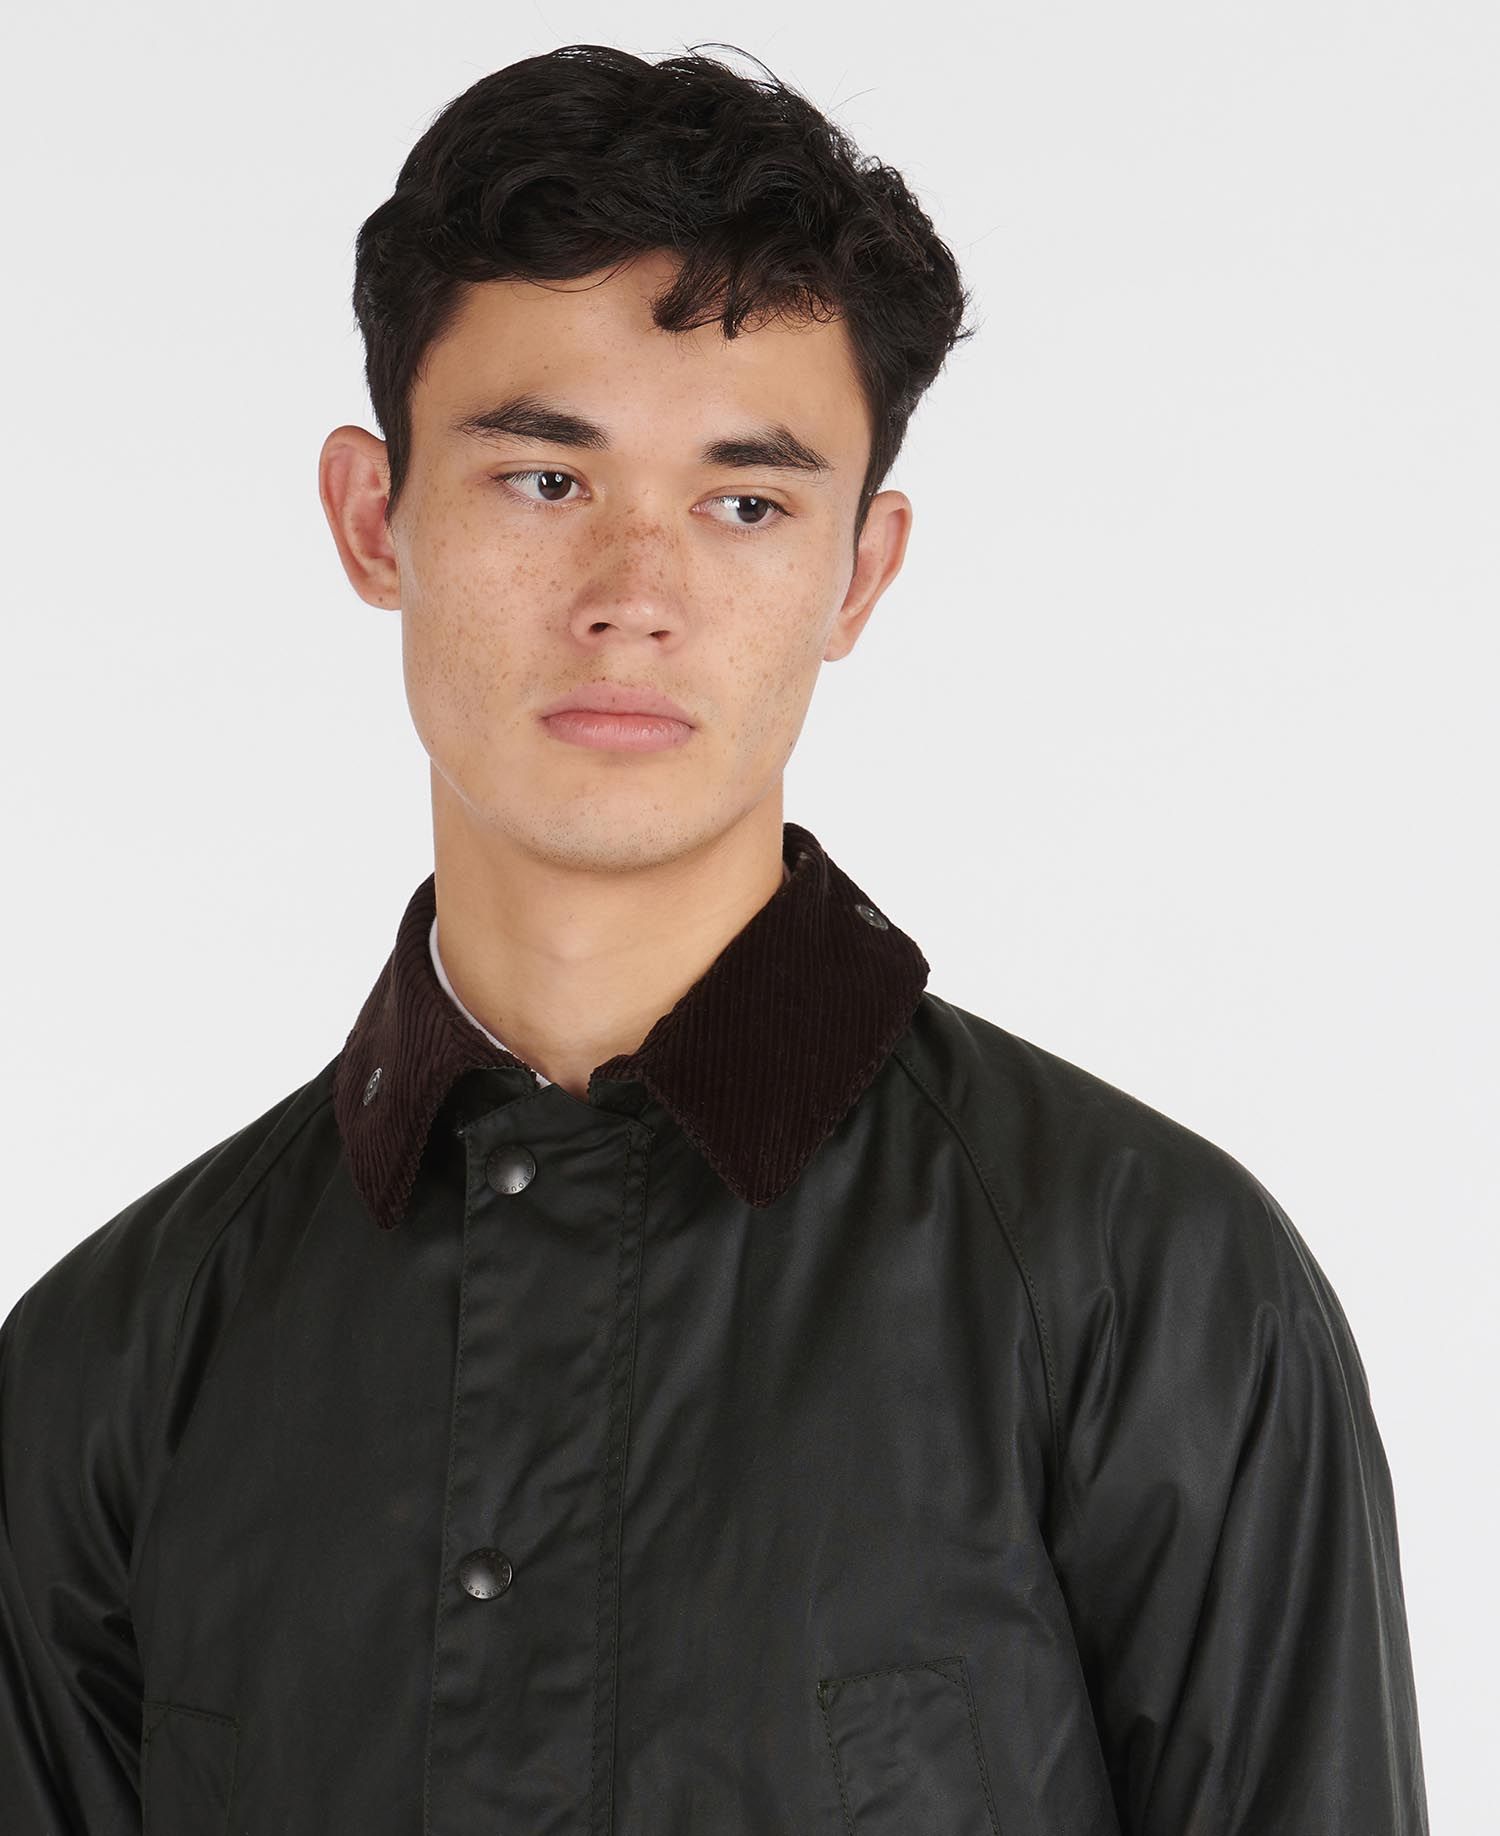 Barbour SL Bedale Waxed Cotton Jacket in Green | Barbour